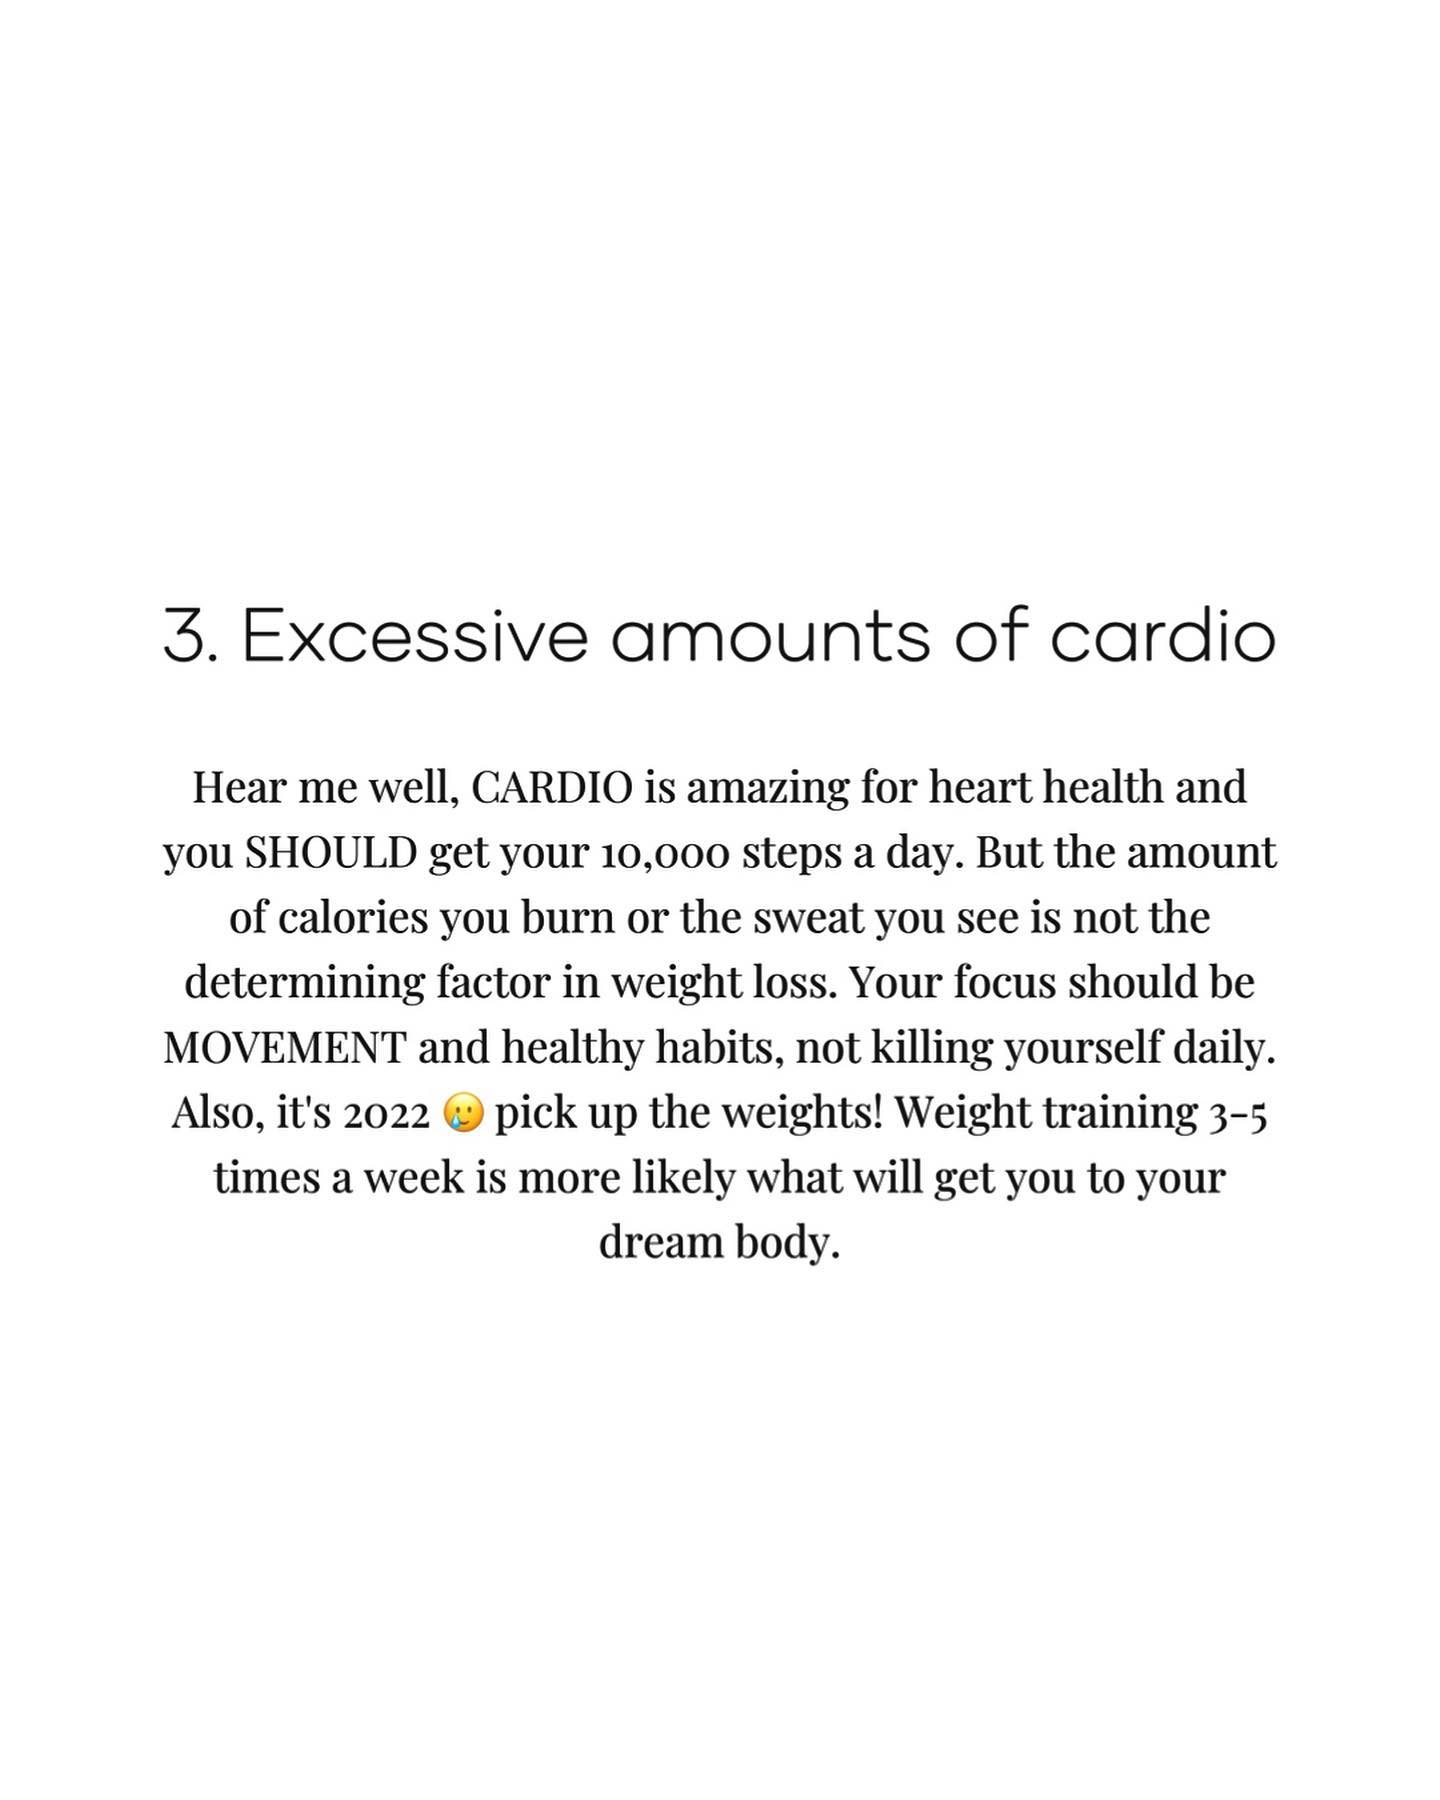 Your dream body is likely 5-10 lbs more than your goal weight and cannot be atta...